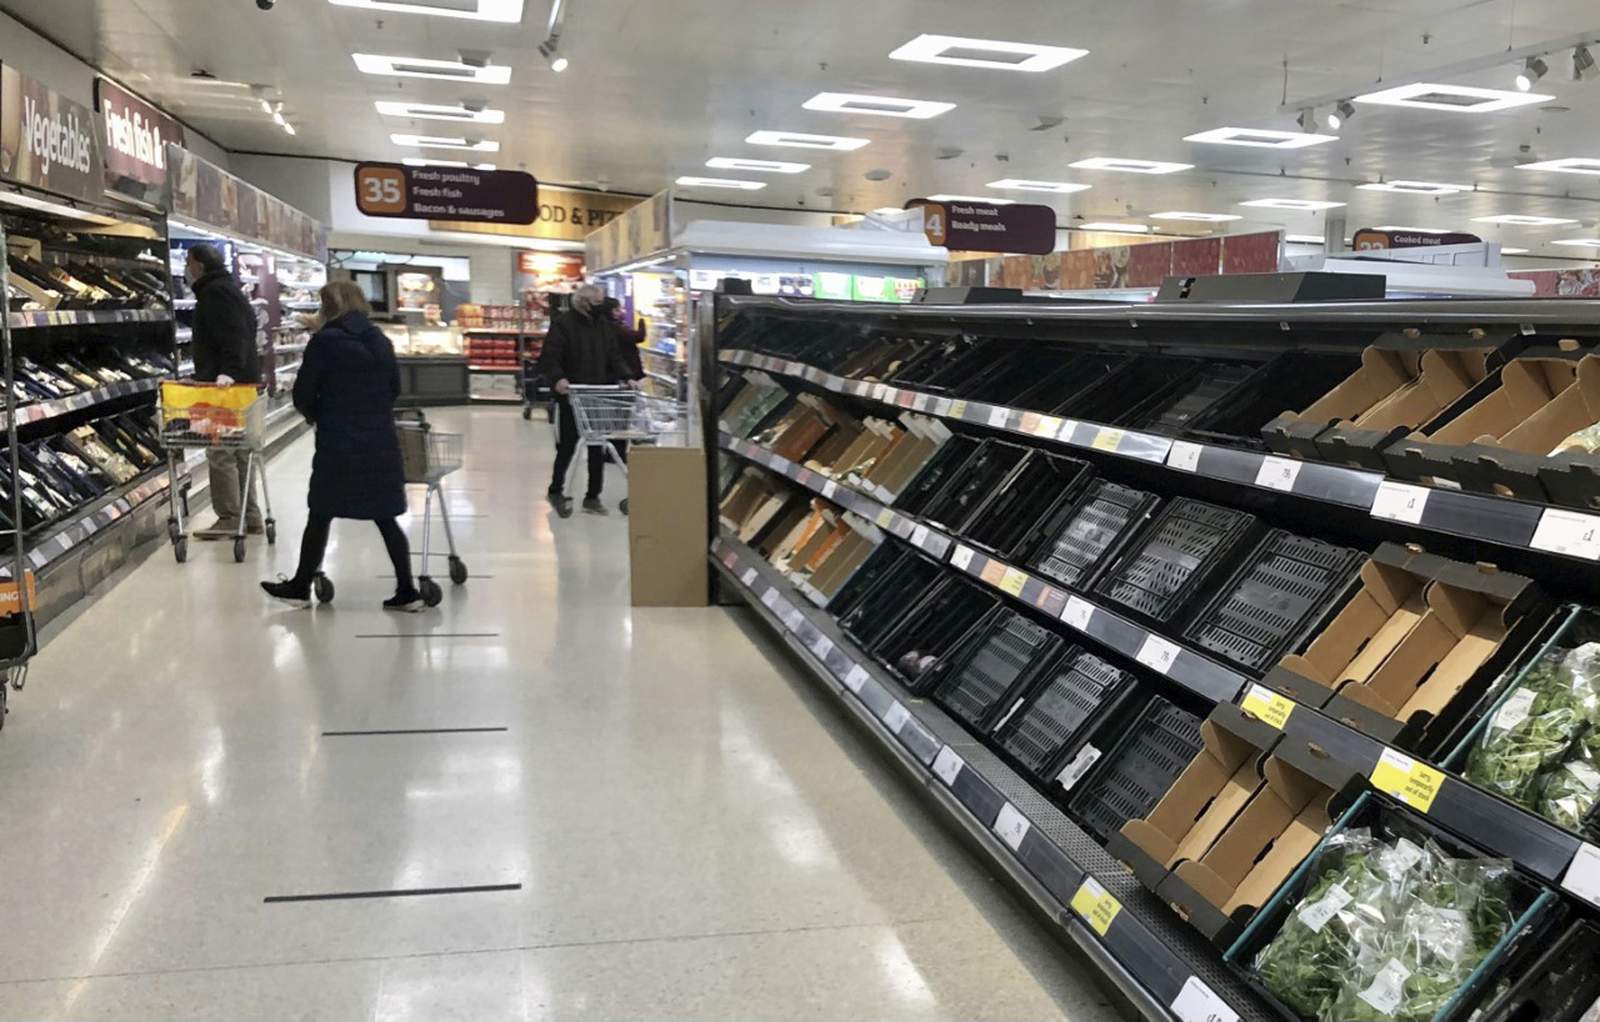 NIreland stores see empty shelves as Brexit trade rules bite